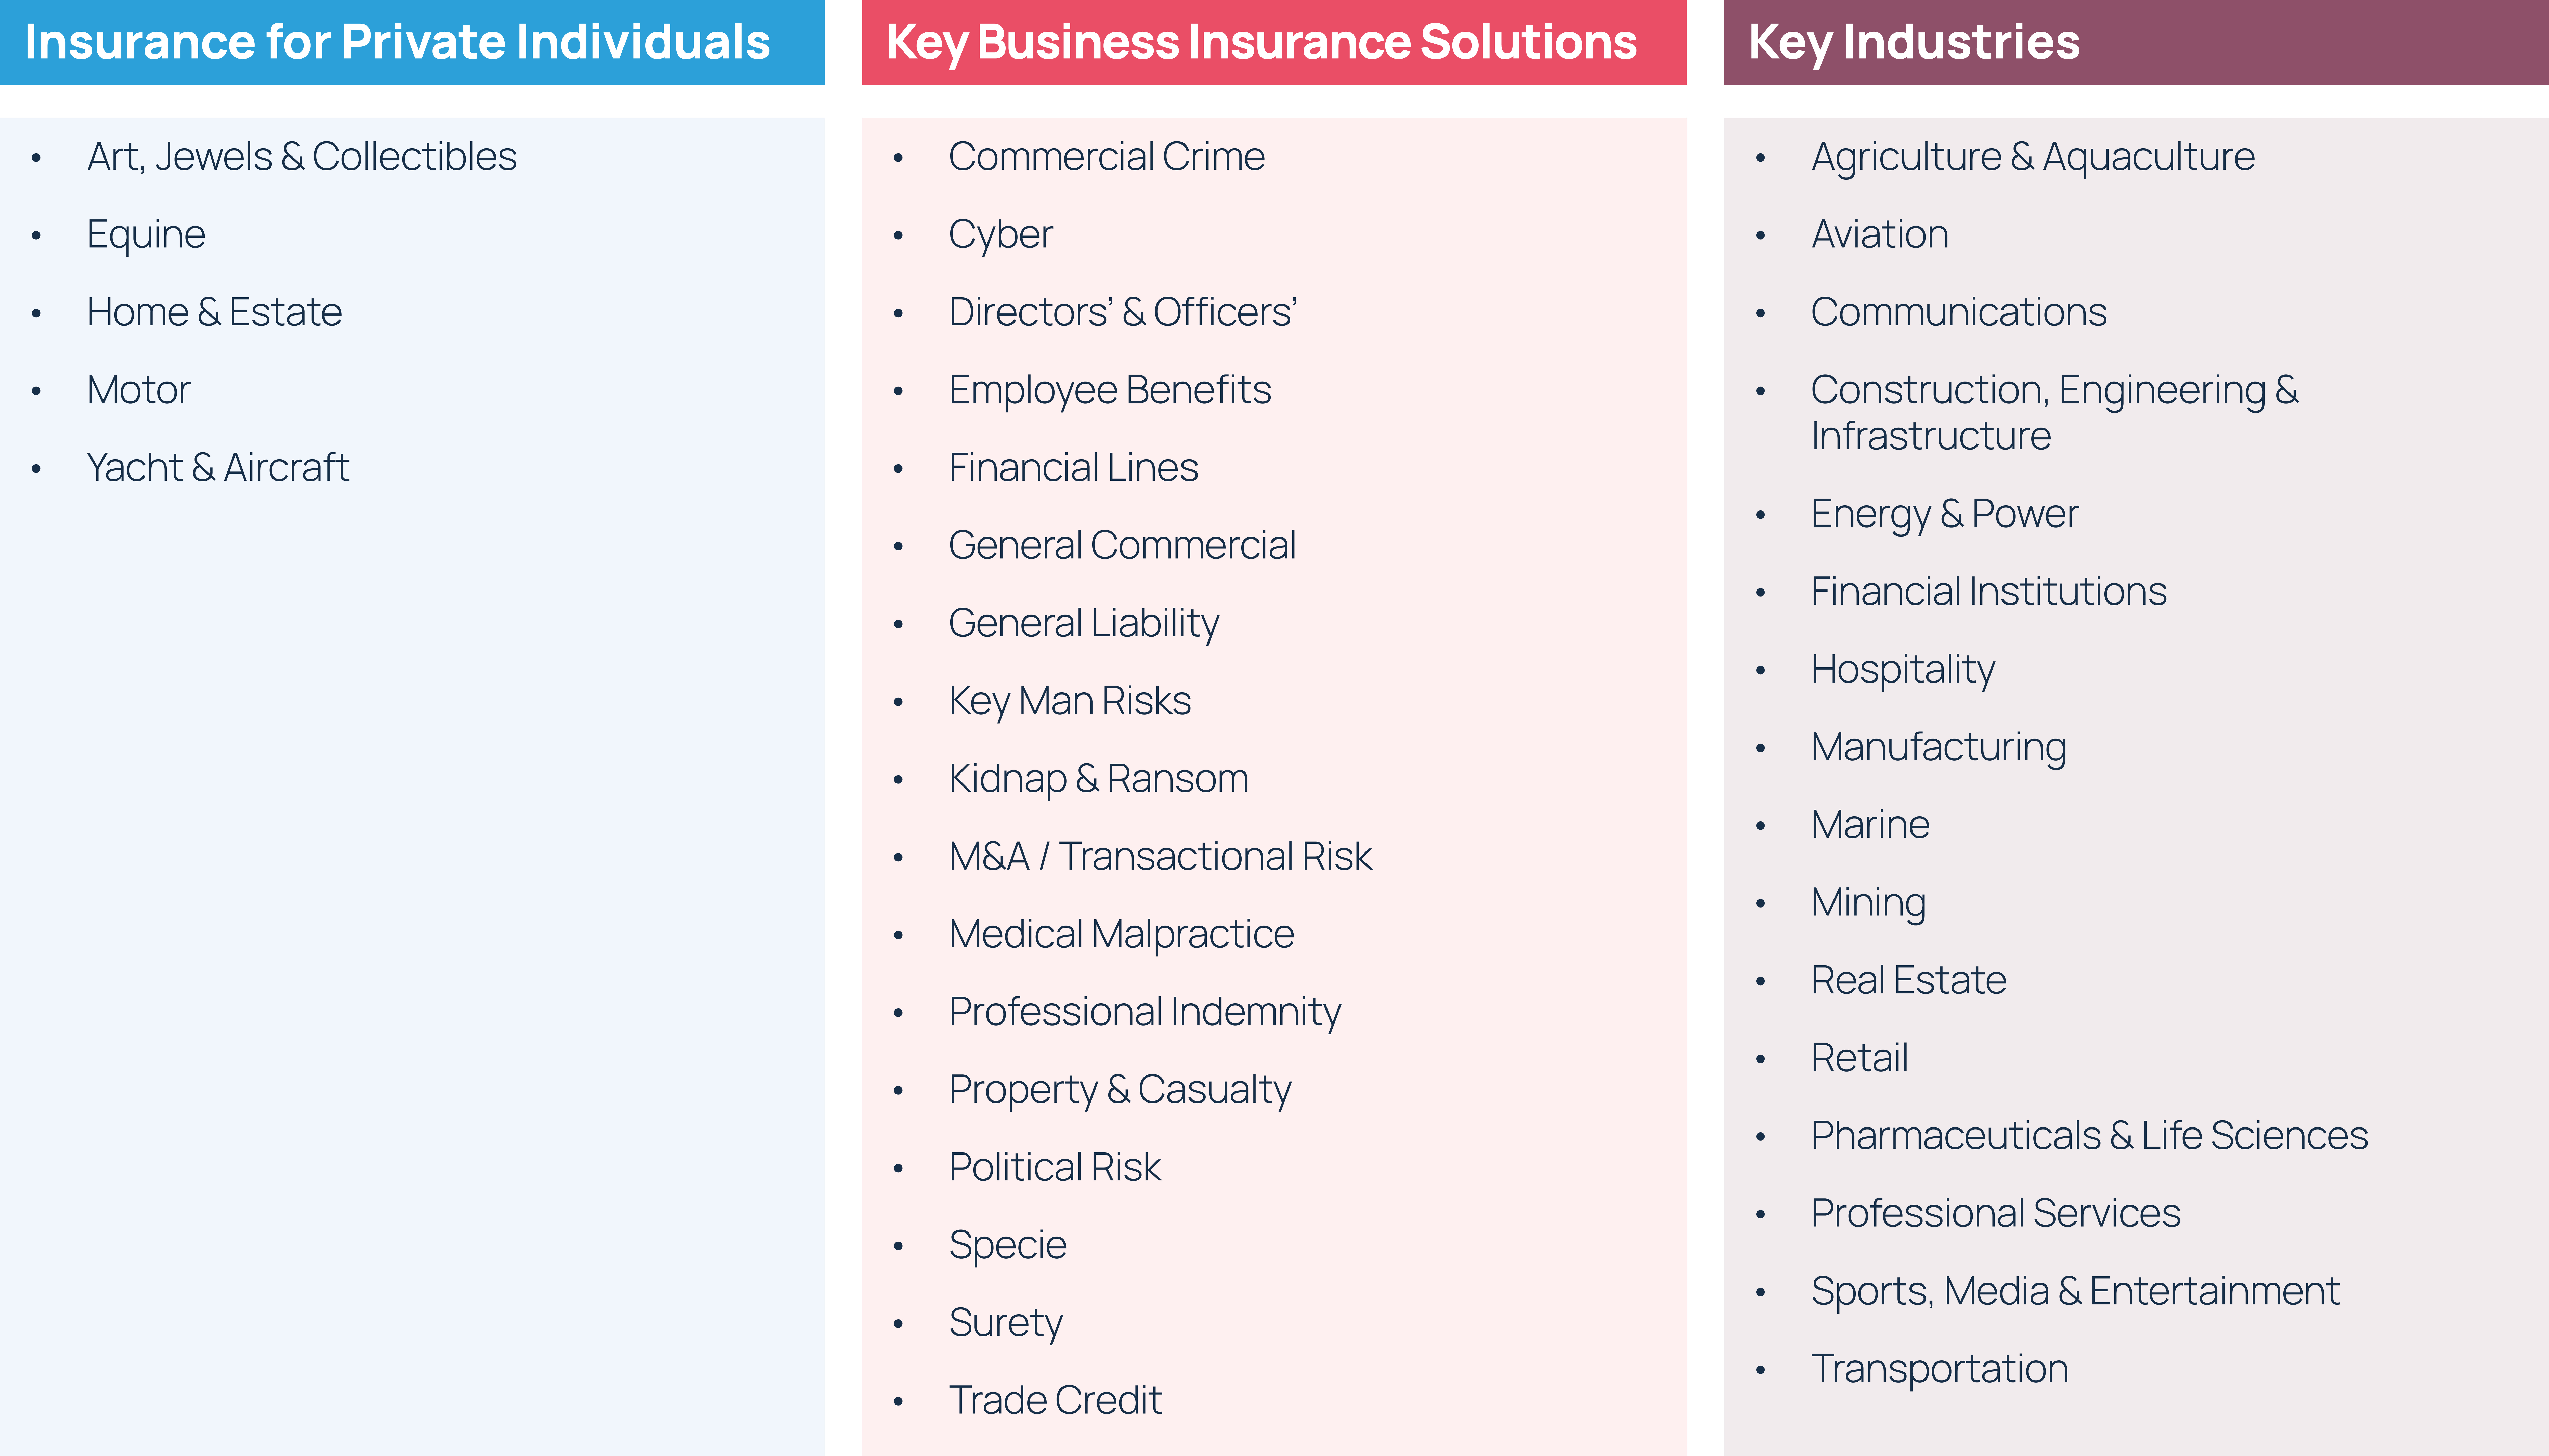 A list of insurance products Howden Group provides: Commercial crime Cyber Directors' and Officers' Employee Benefits  Financial Lines  General commercial  General Liability Key man risks Kidnap & Ransom M&A / Transactional Risk Medical Malpractice Professional indemnity Property & Casualty Political Risk Specie Surety Trade Credit